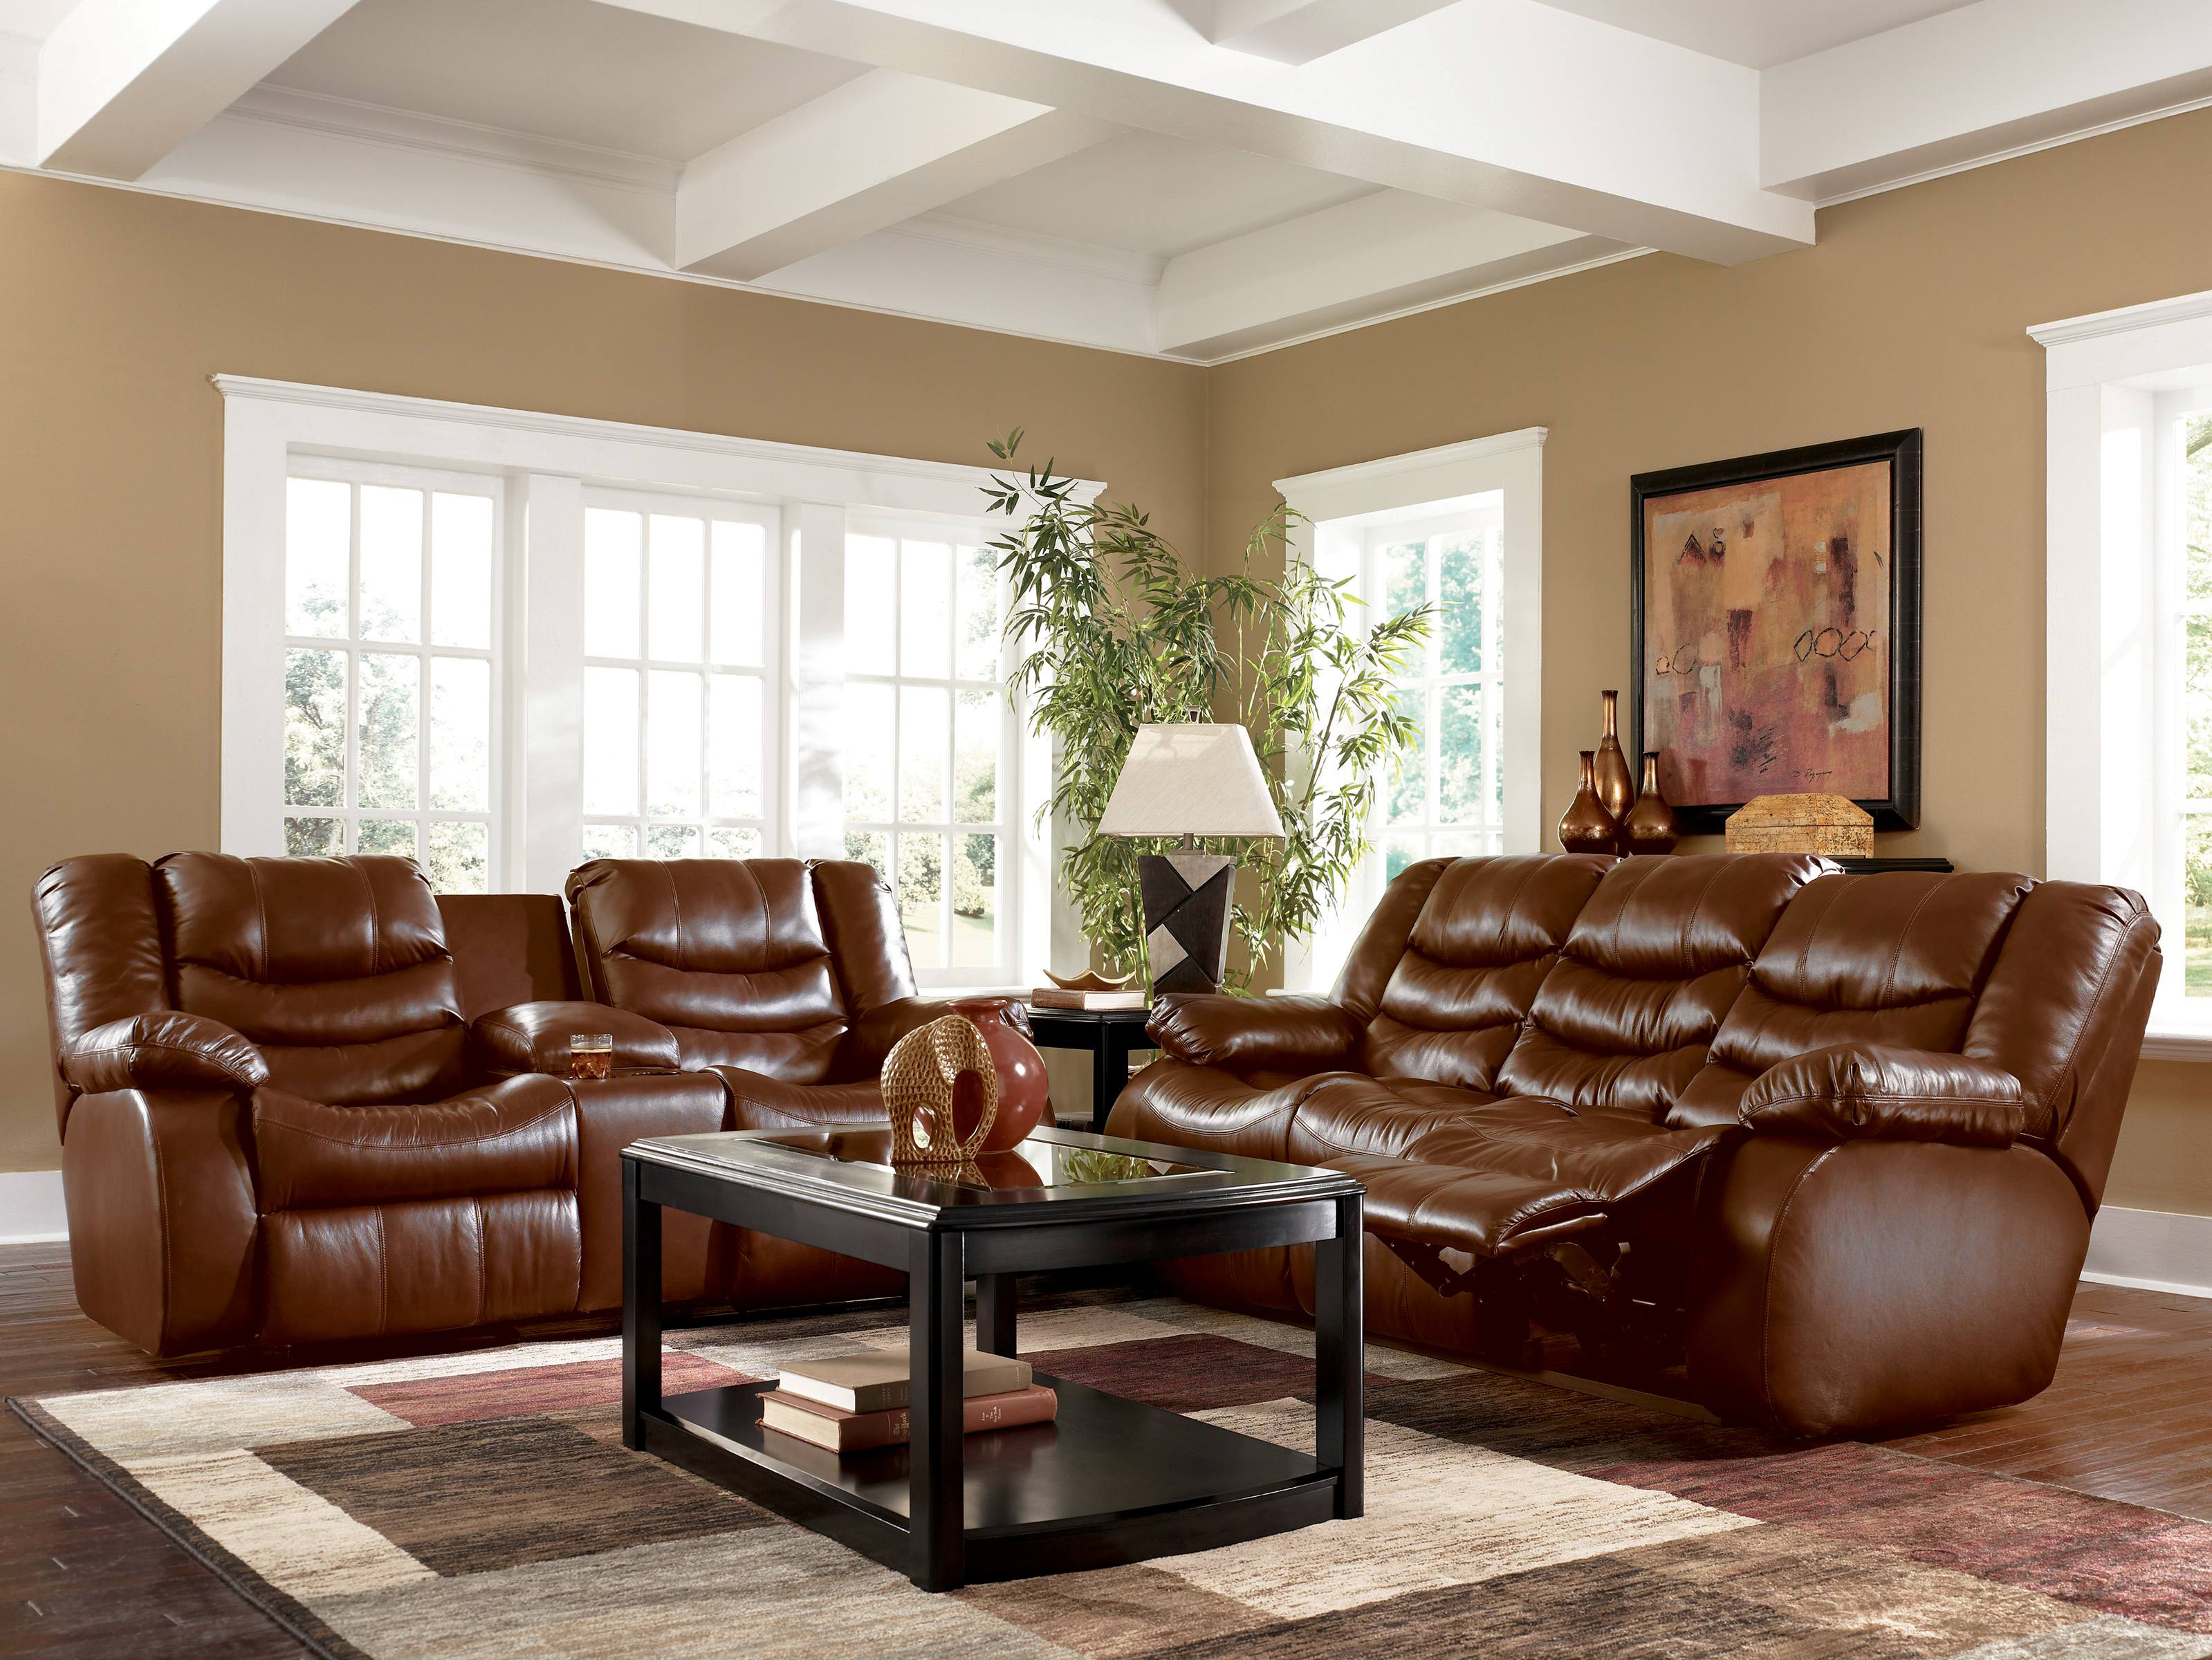 living room ideas with leather furniture furniture charming light brown leather sofa decorating ideas brown from GVMNFSE